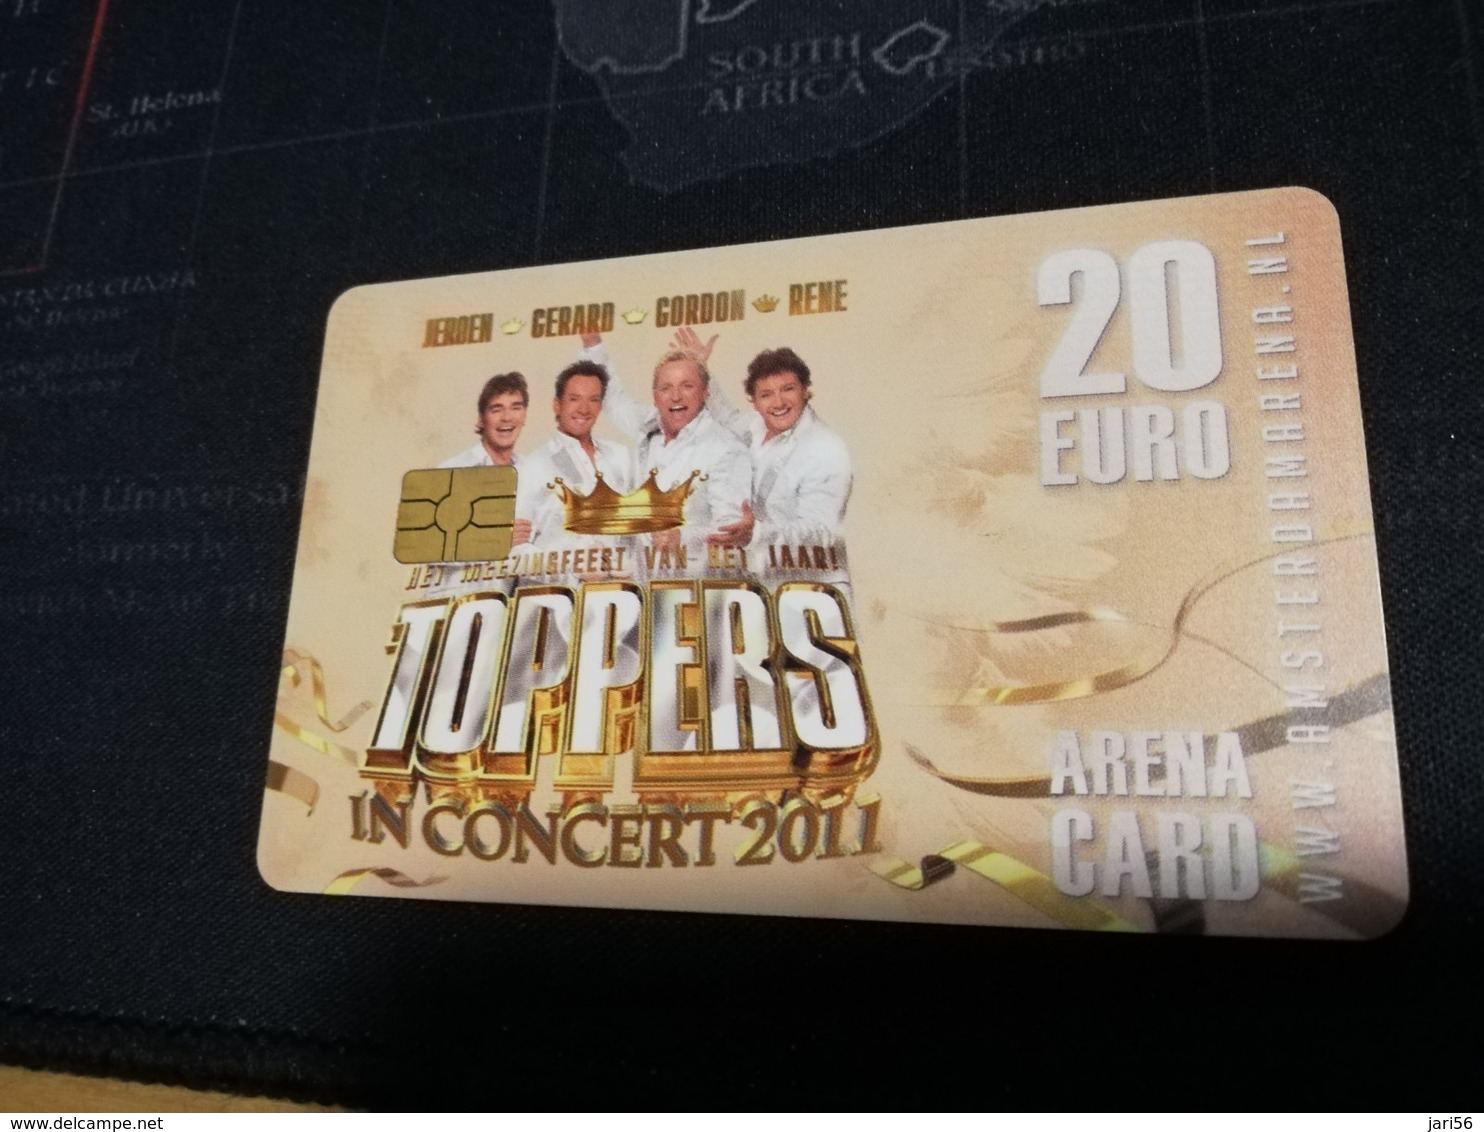 NETHERLANDS  ARENA CARD  TOPPERS IN CONCERT 2011     €20- USED CARD  ** 1437** - öffentlich